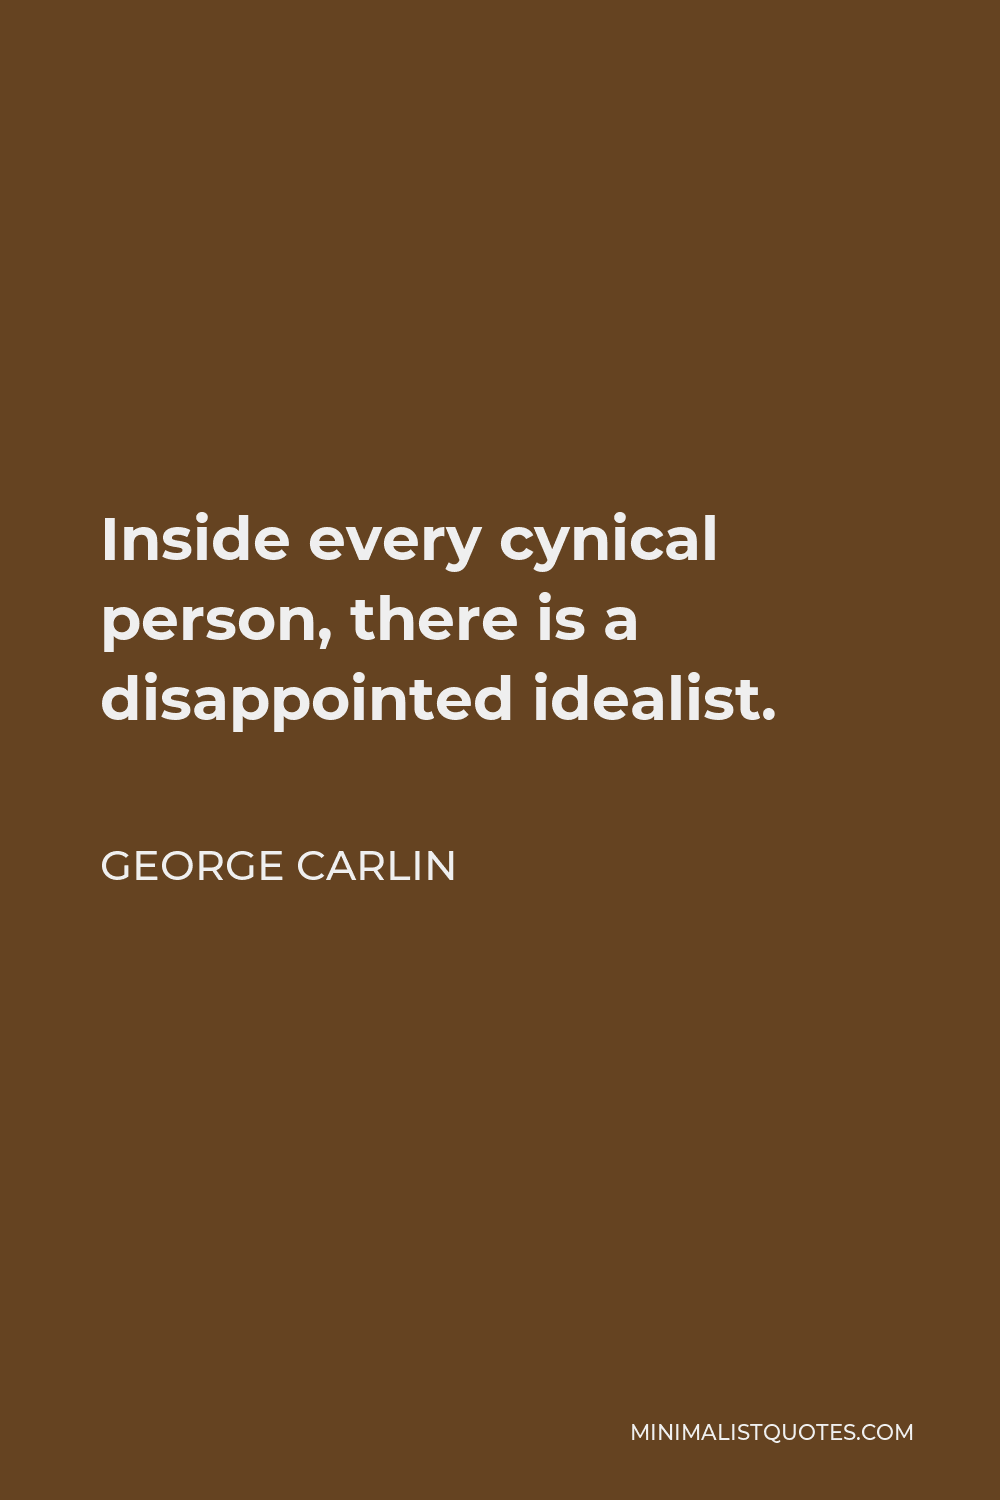 George Carlin Quote - Inside every cynical person, there is a disappointed idealist.